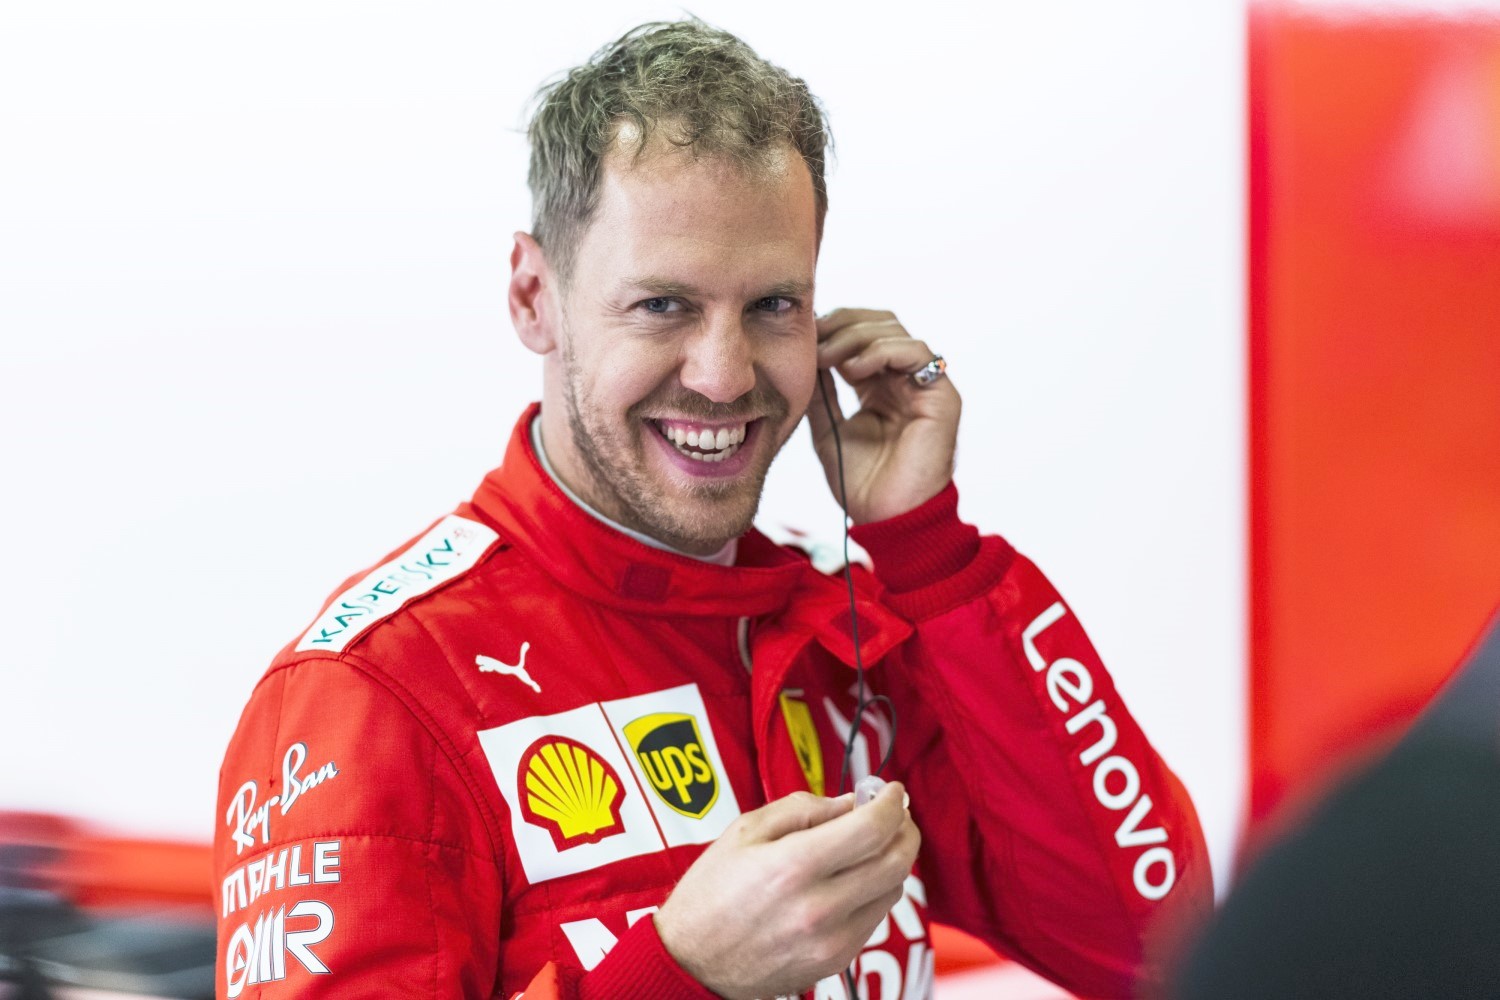 Vettel must now drive the development of the 2020 Ferrari in his direction